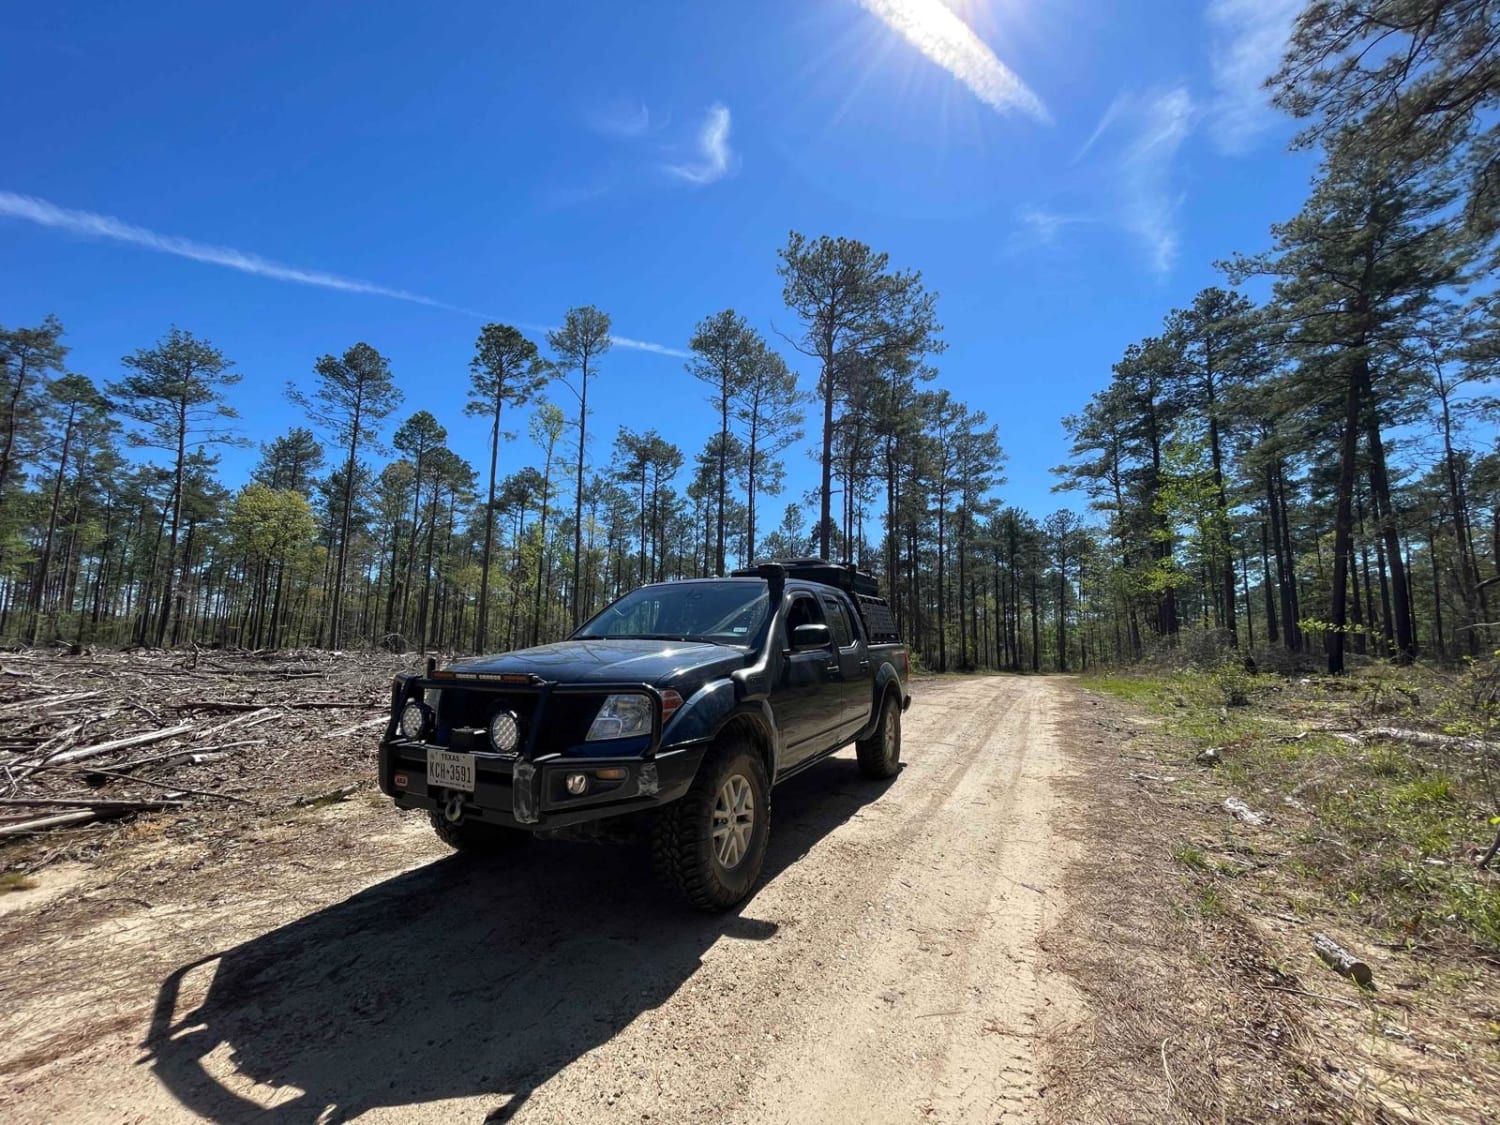 Longleaf Route